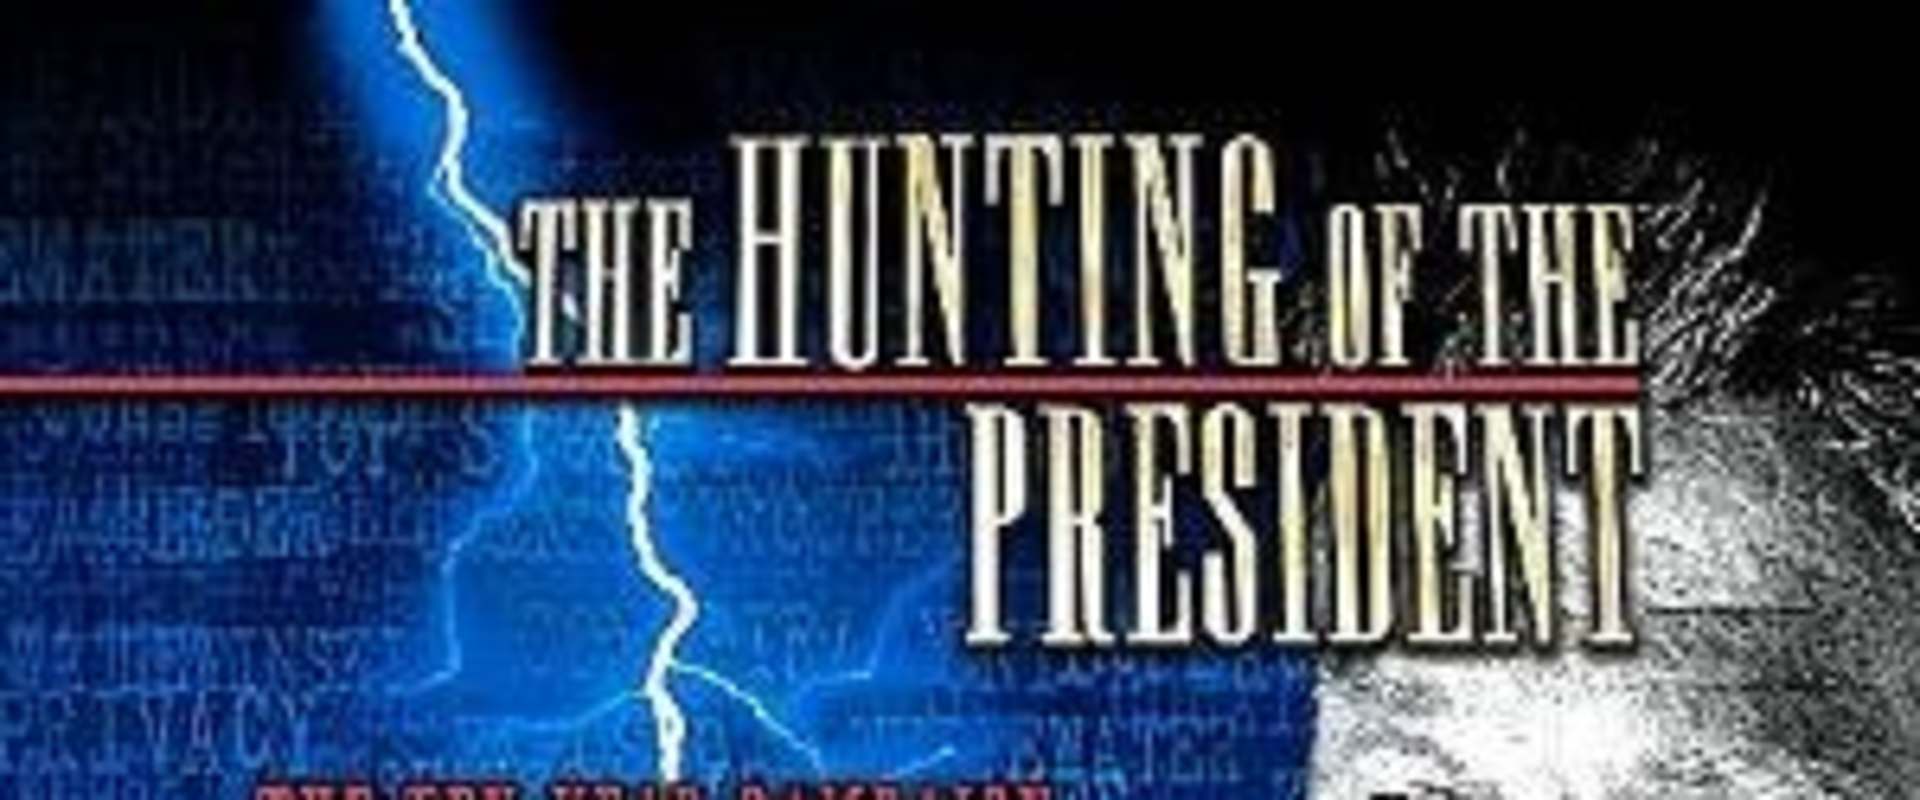 The Hunting of the President background 1